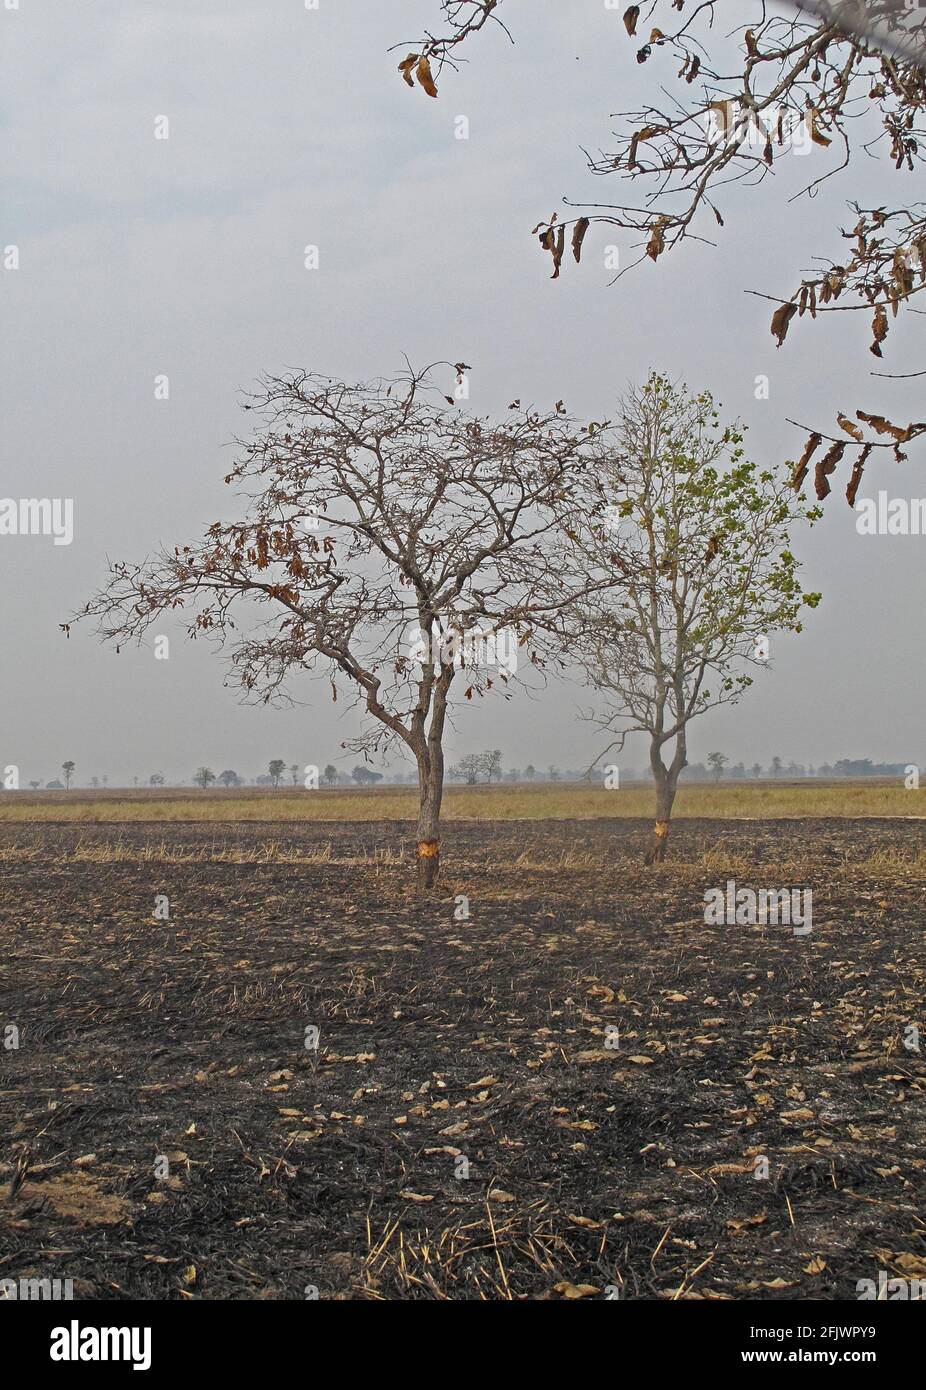 ring-barking trees to clear for agriculture, with burnt ground Ang Trapaeng Thmor, Cambodia            January 2013 Stock Photo